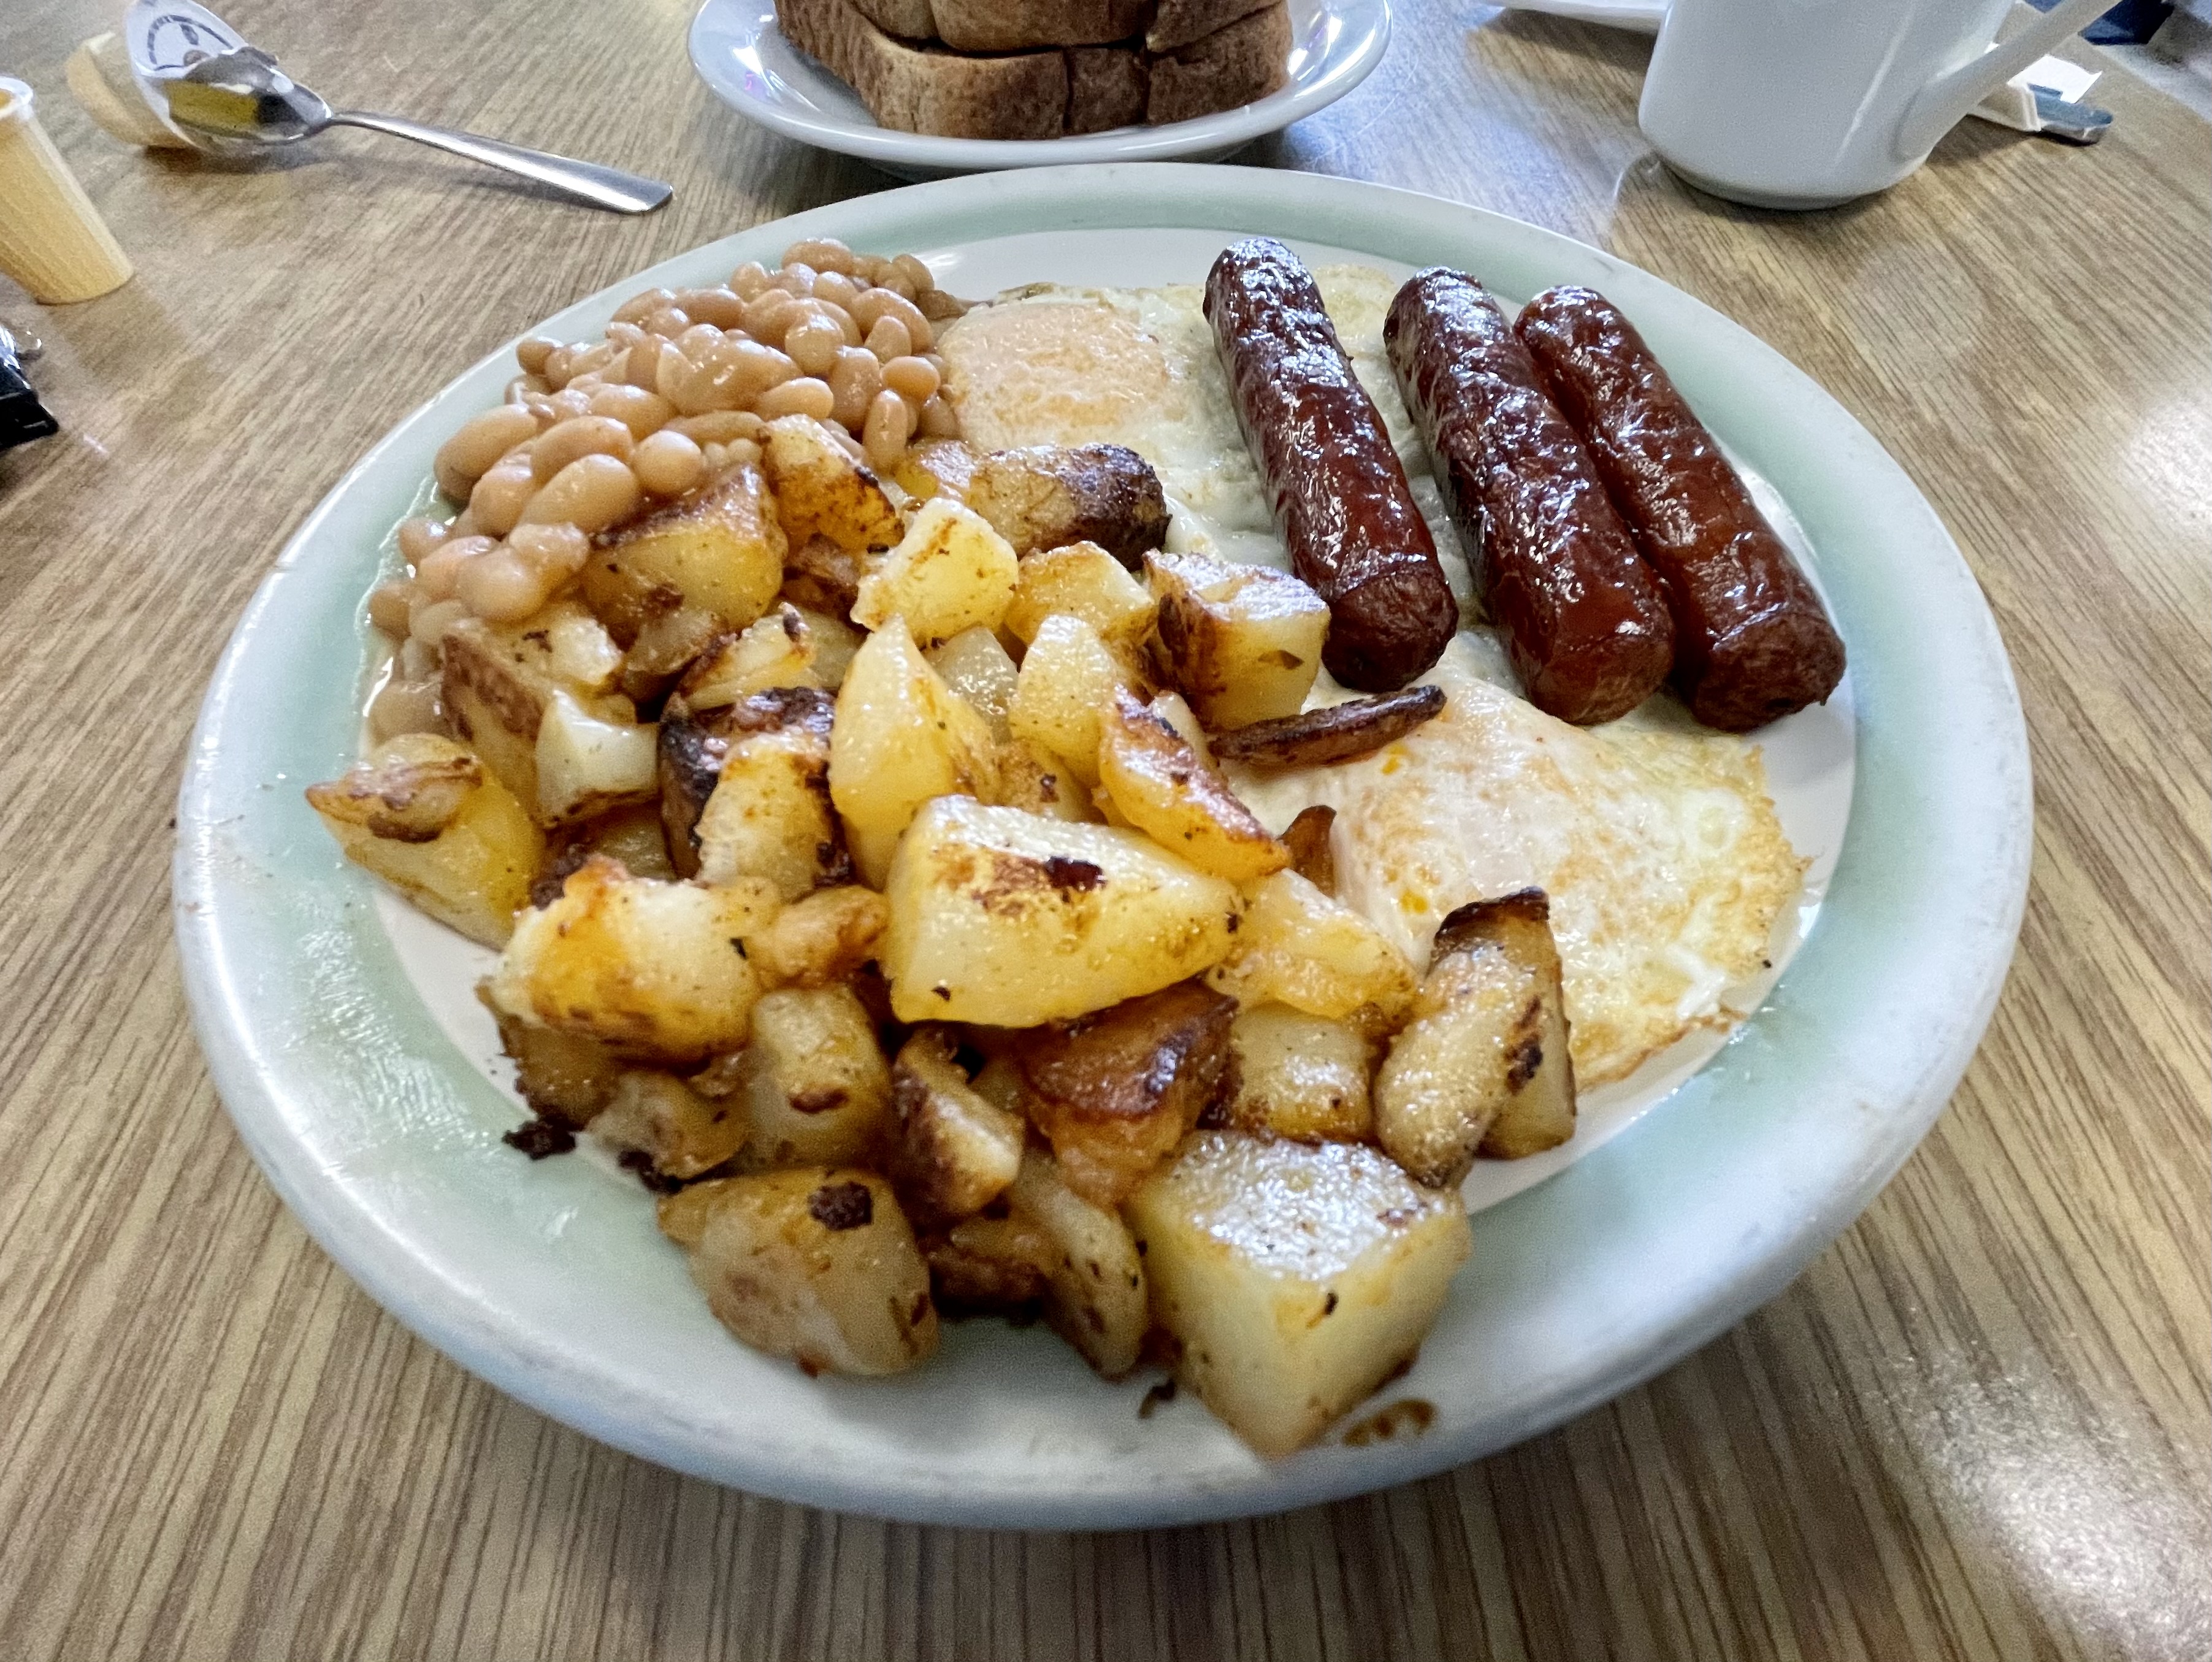 While home fries can tend to be quite salty, the ones serves at Mona’s Café and Restaurant were perfectly seasoned